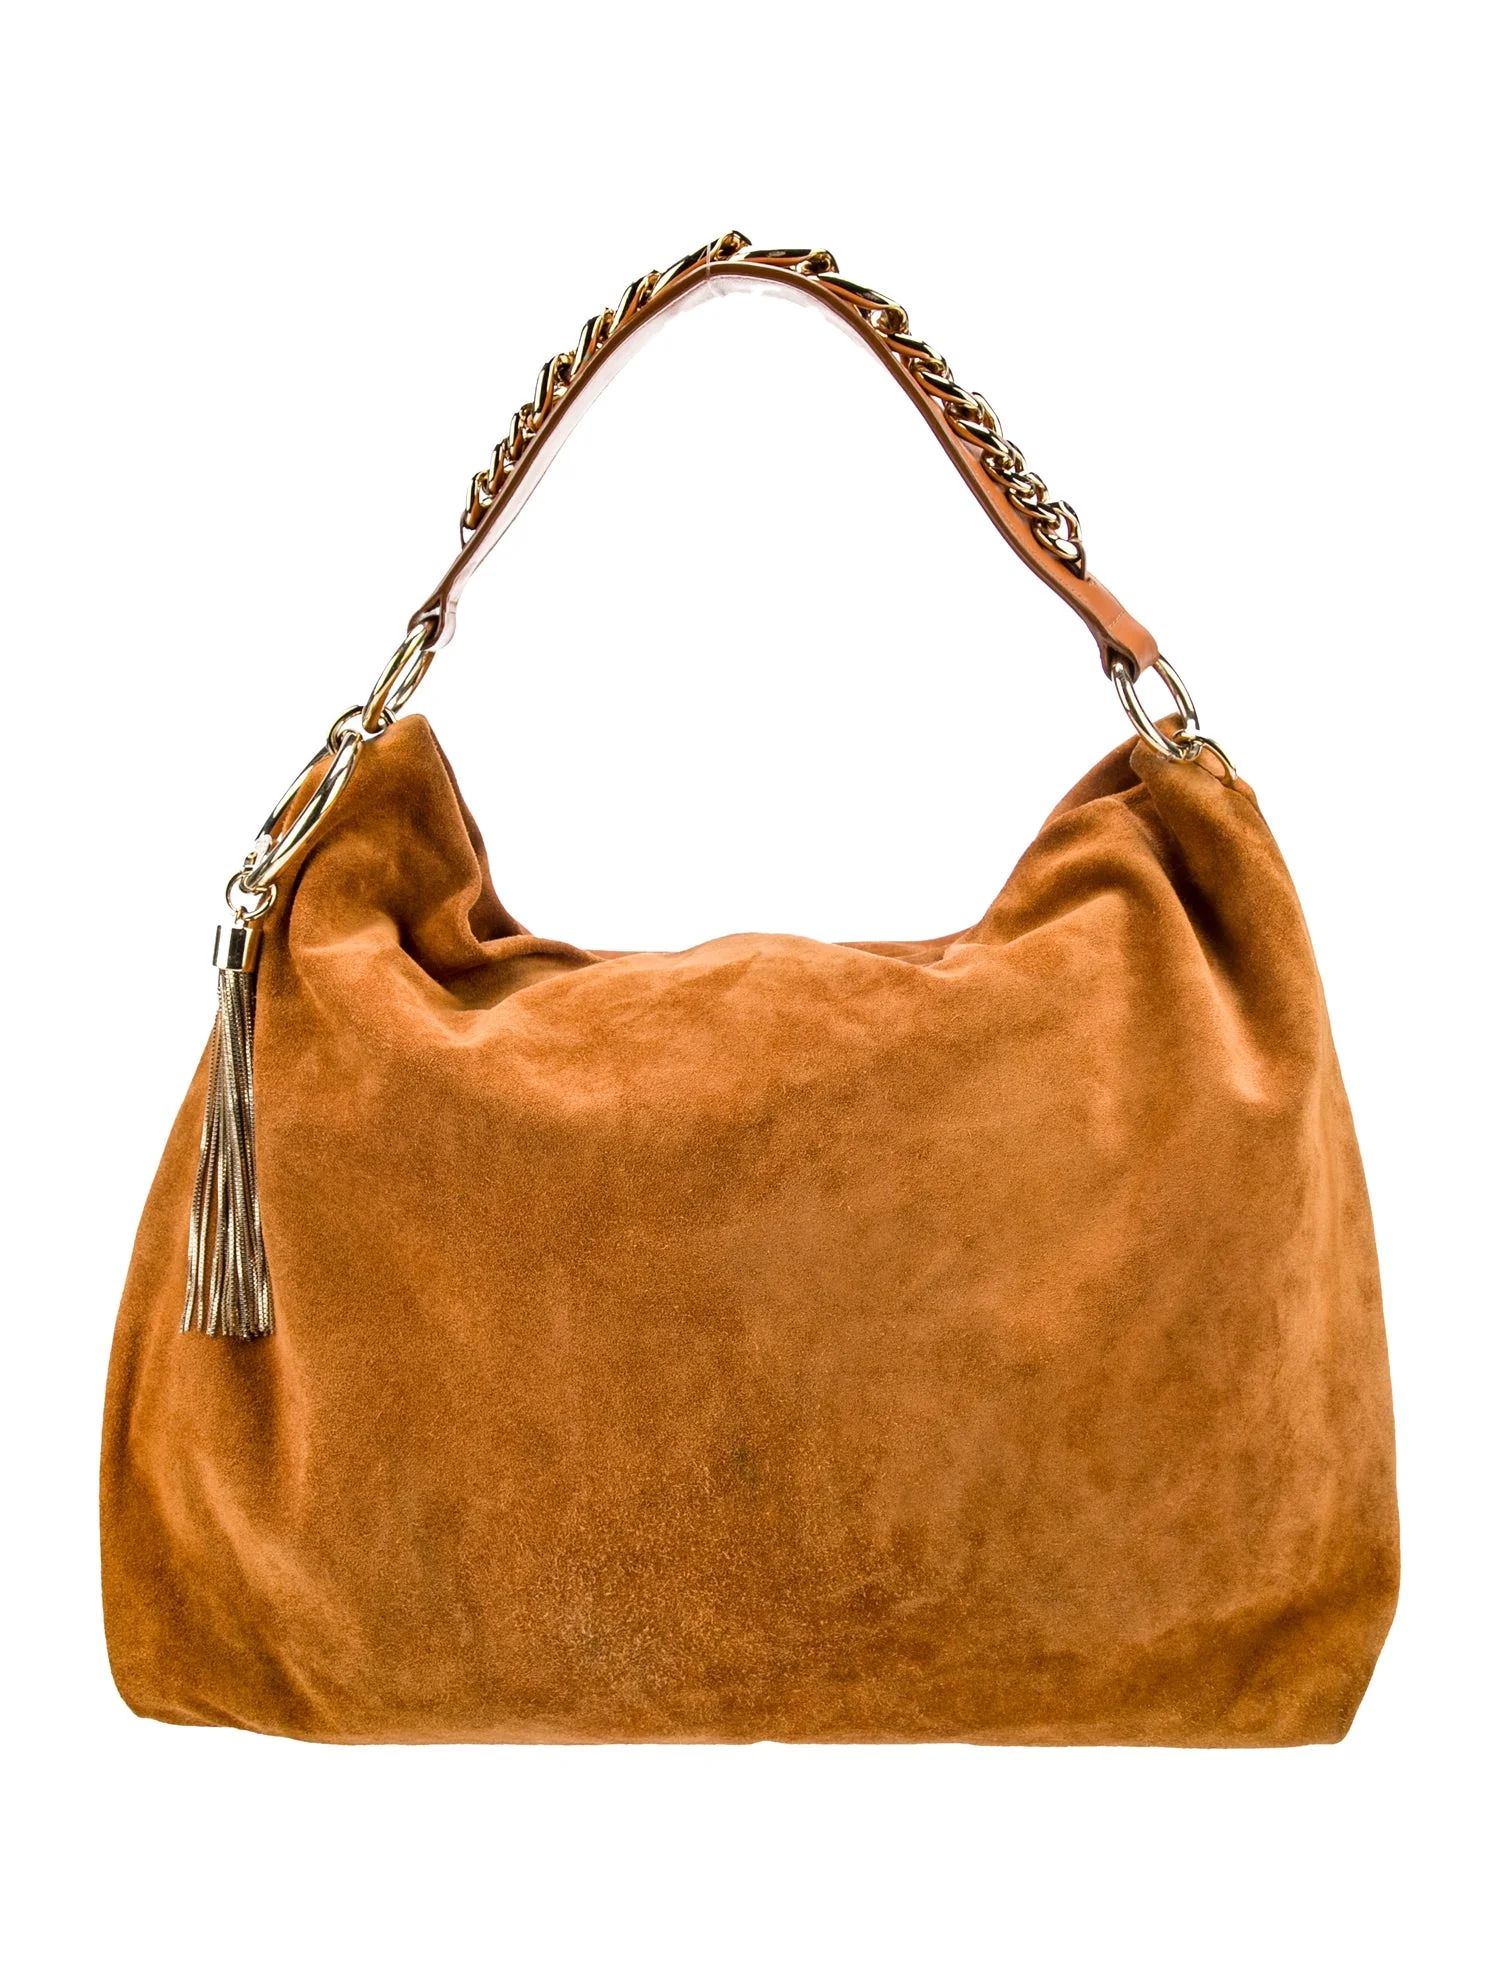 Chain Link Suede Callie L Hobo Bag | The RealReal